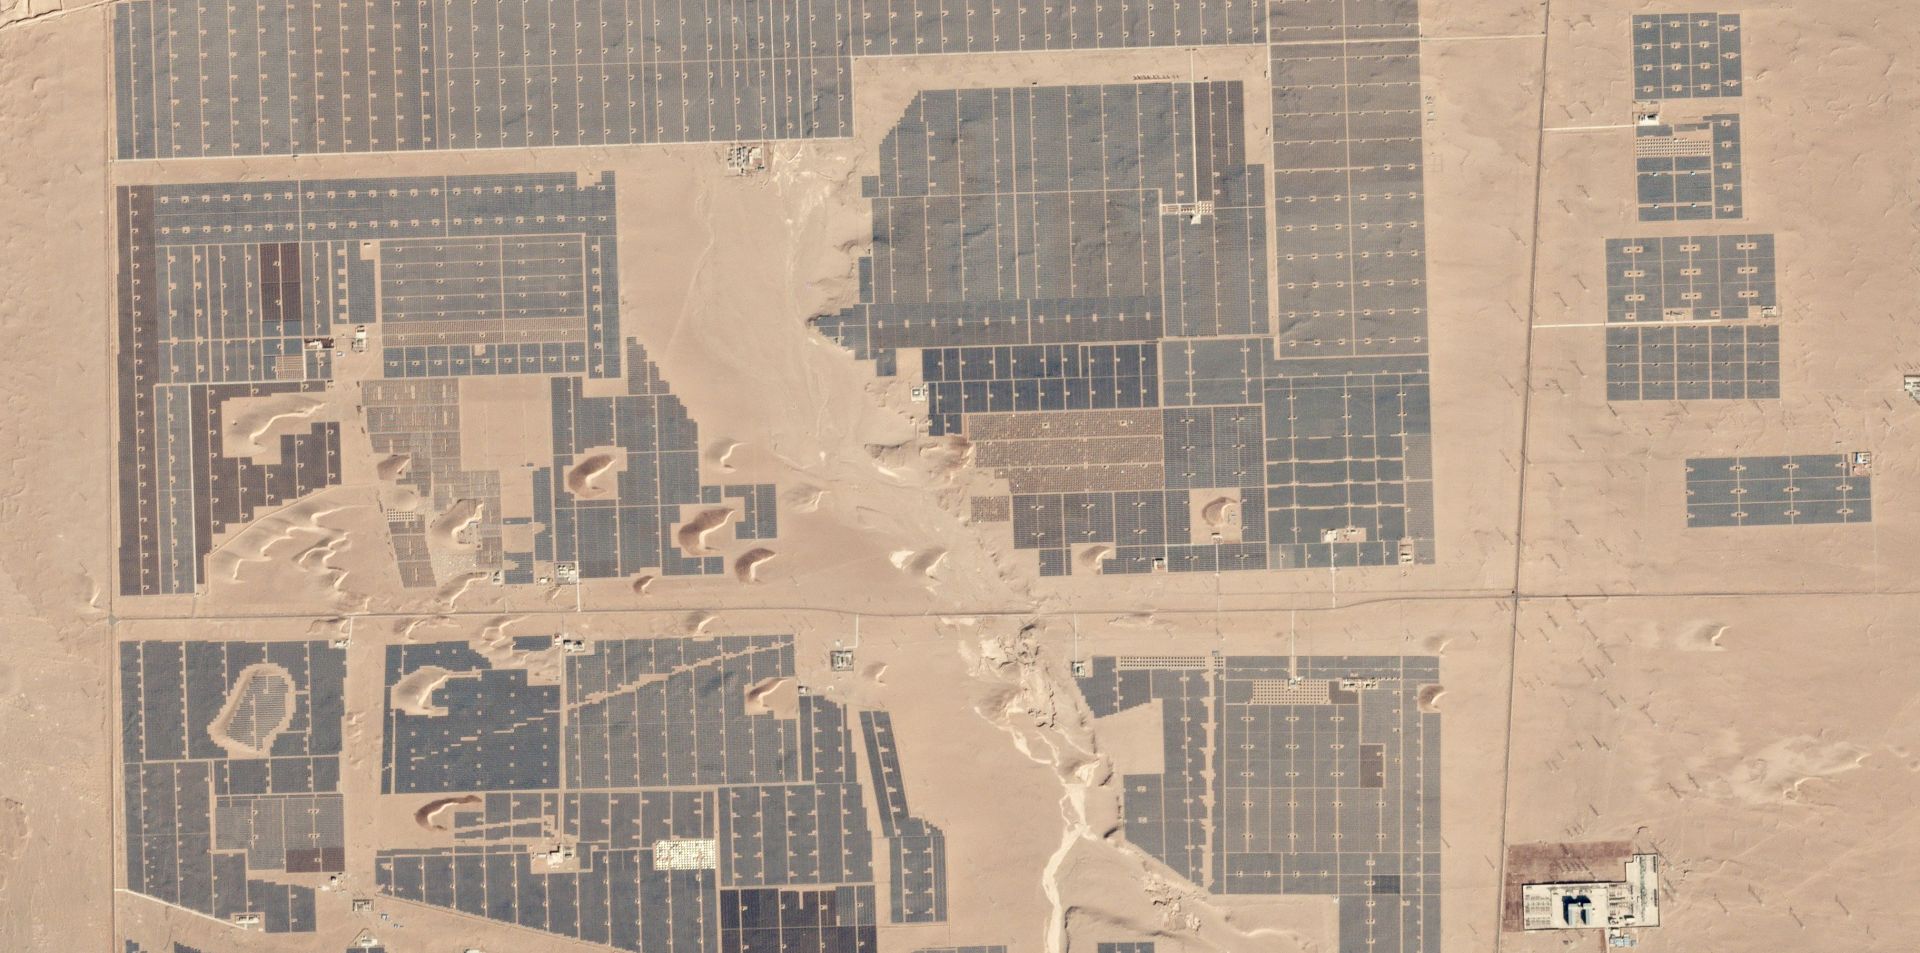 Chinese solar farm in the desert, seen from the air